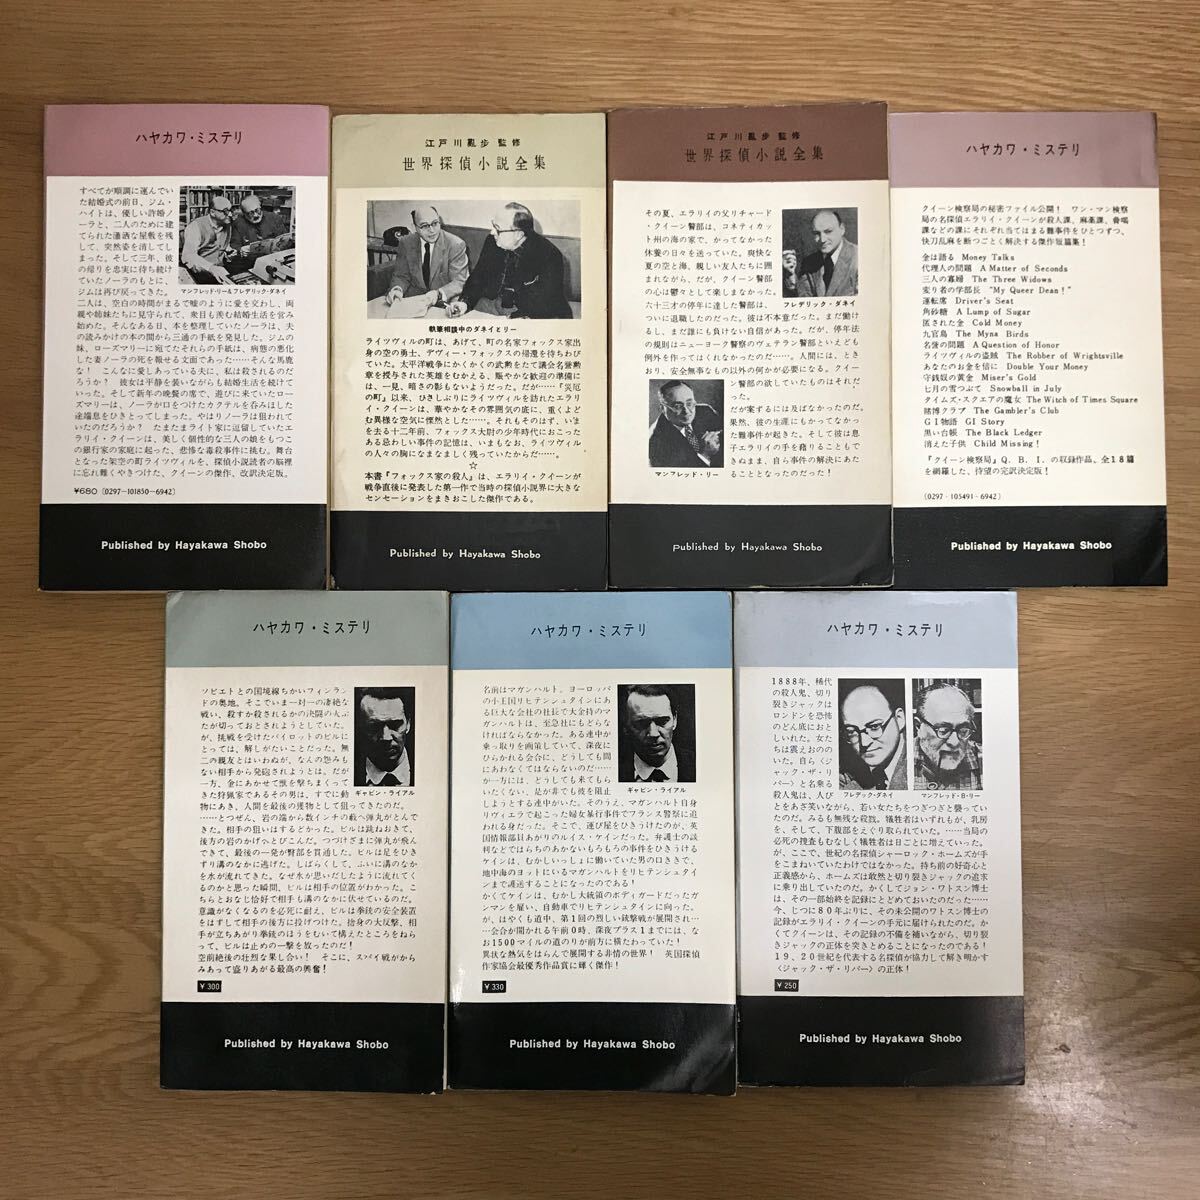 [ free shipping ] Ellery * Queen Gavin * Lyall Hayakawa pocket mystery together 7 pcs. set fox house. . person other . river bookstore k097